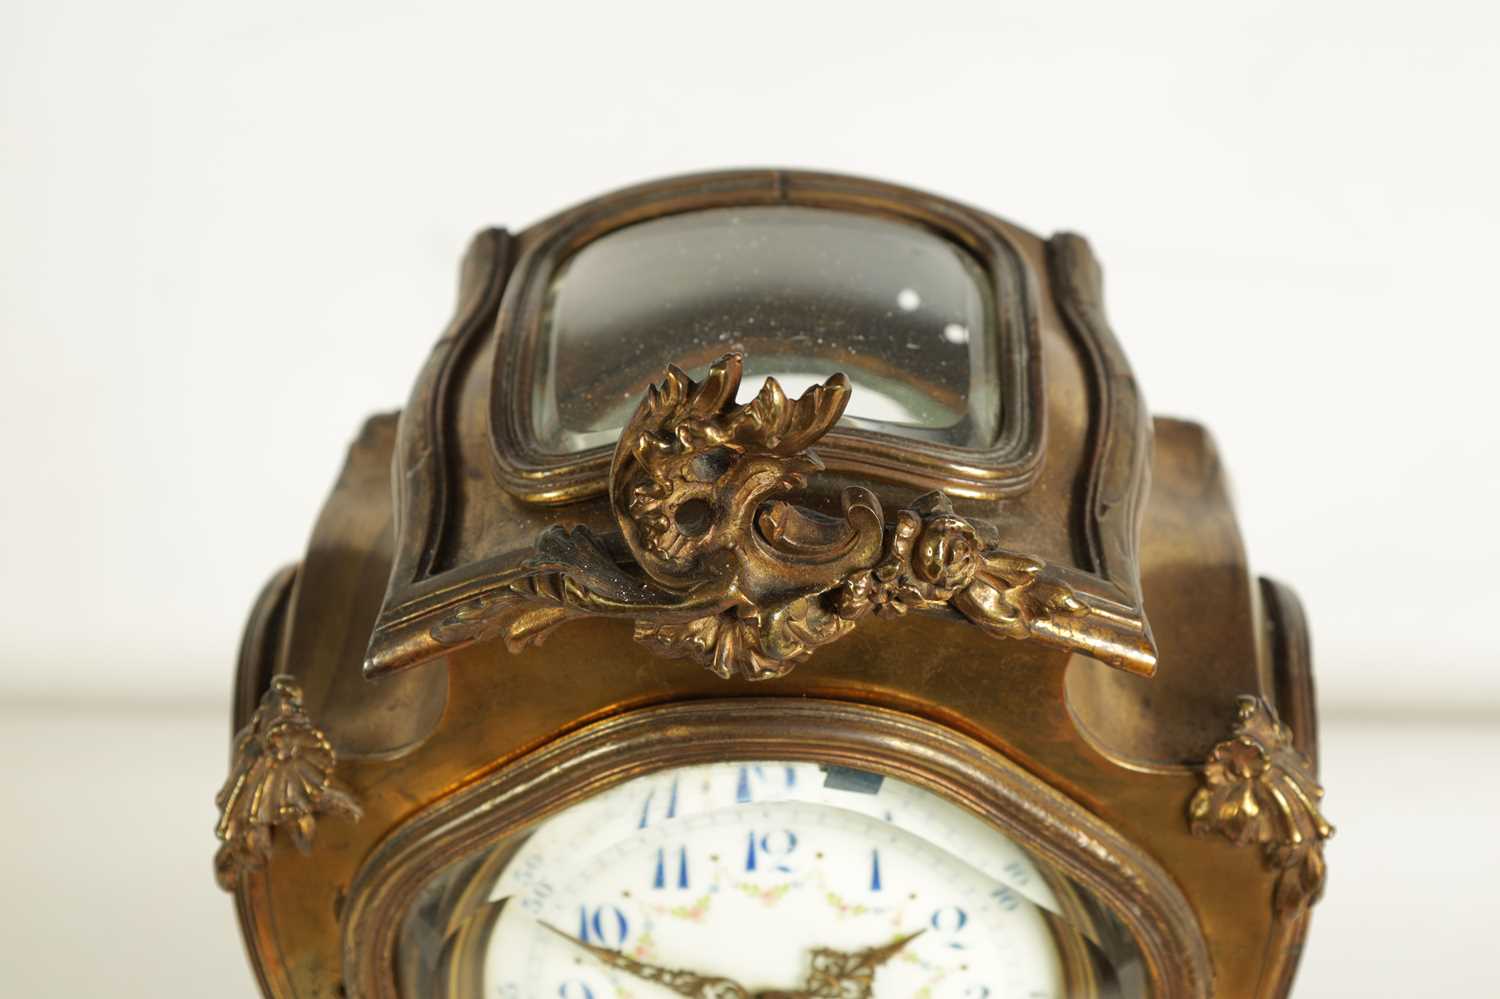 A LATE 19TH CENTURY FRENCH ART NOUVEAU GILT BRASS FOUR GLASS MANTEL CLOCK - Image 3 of 13